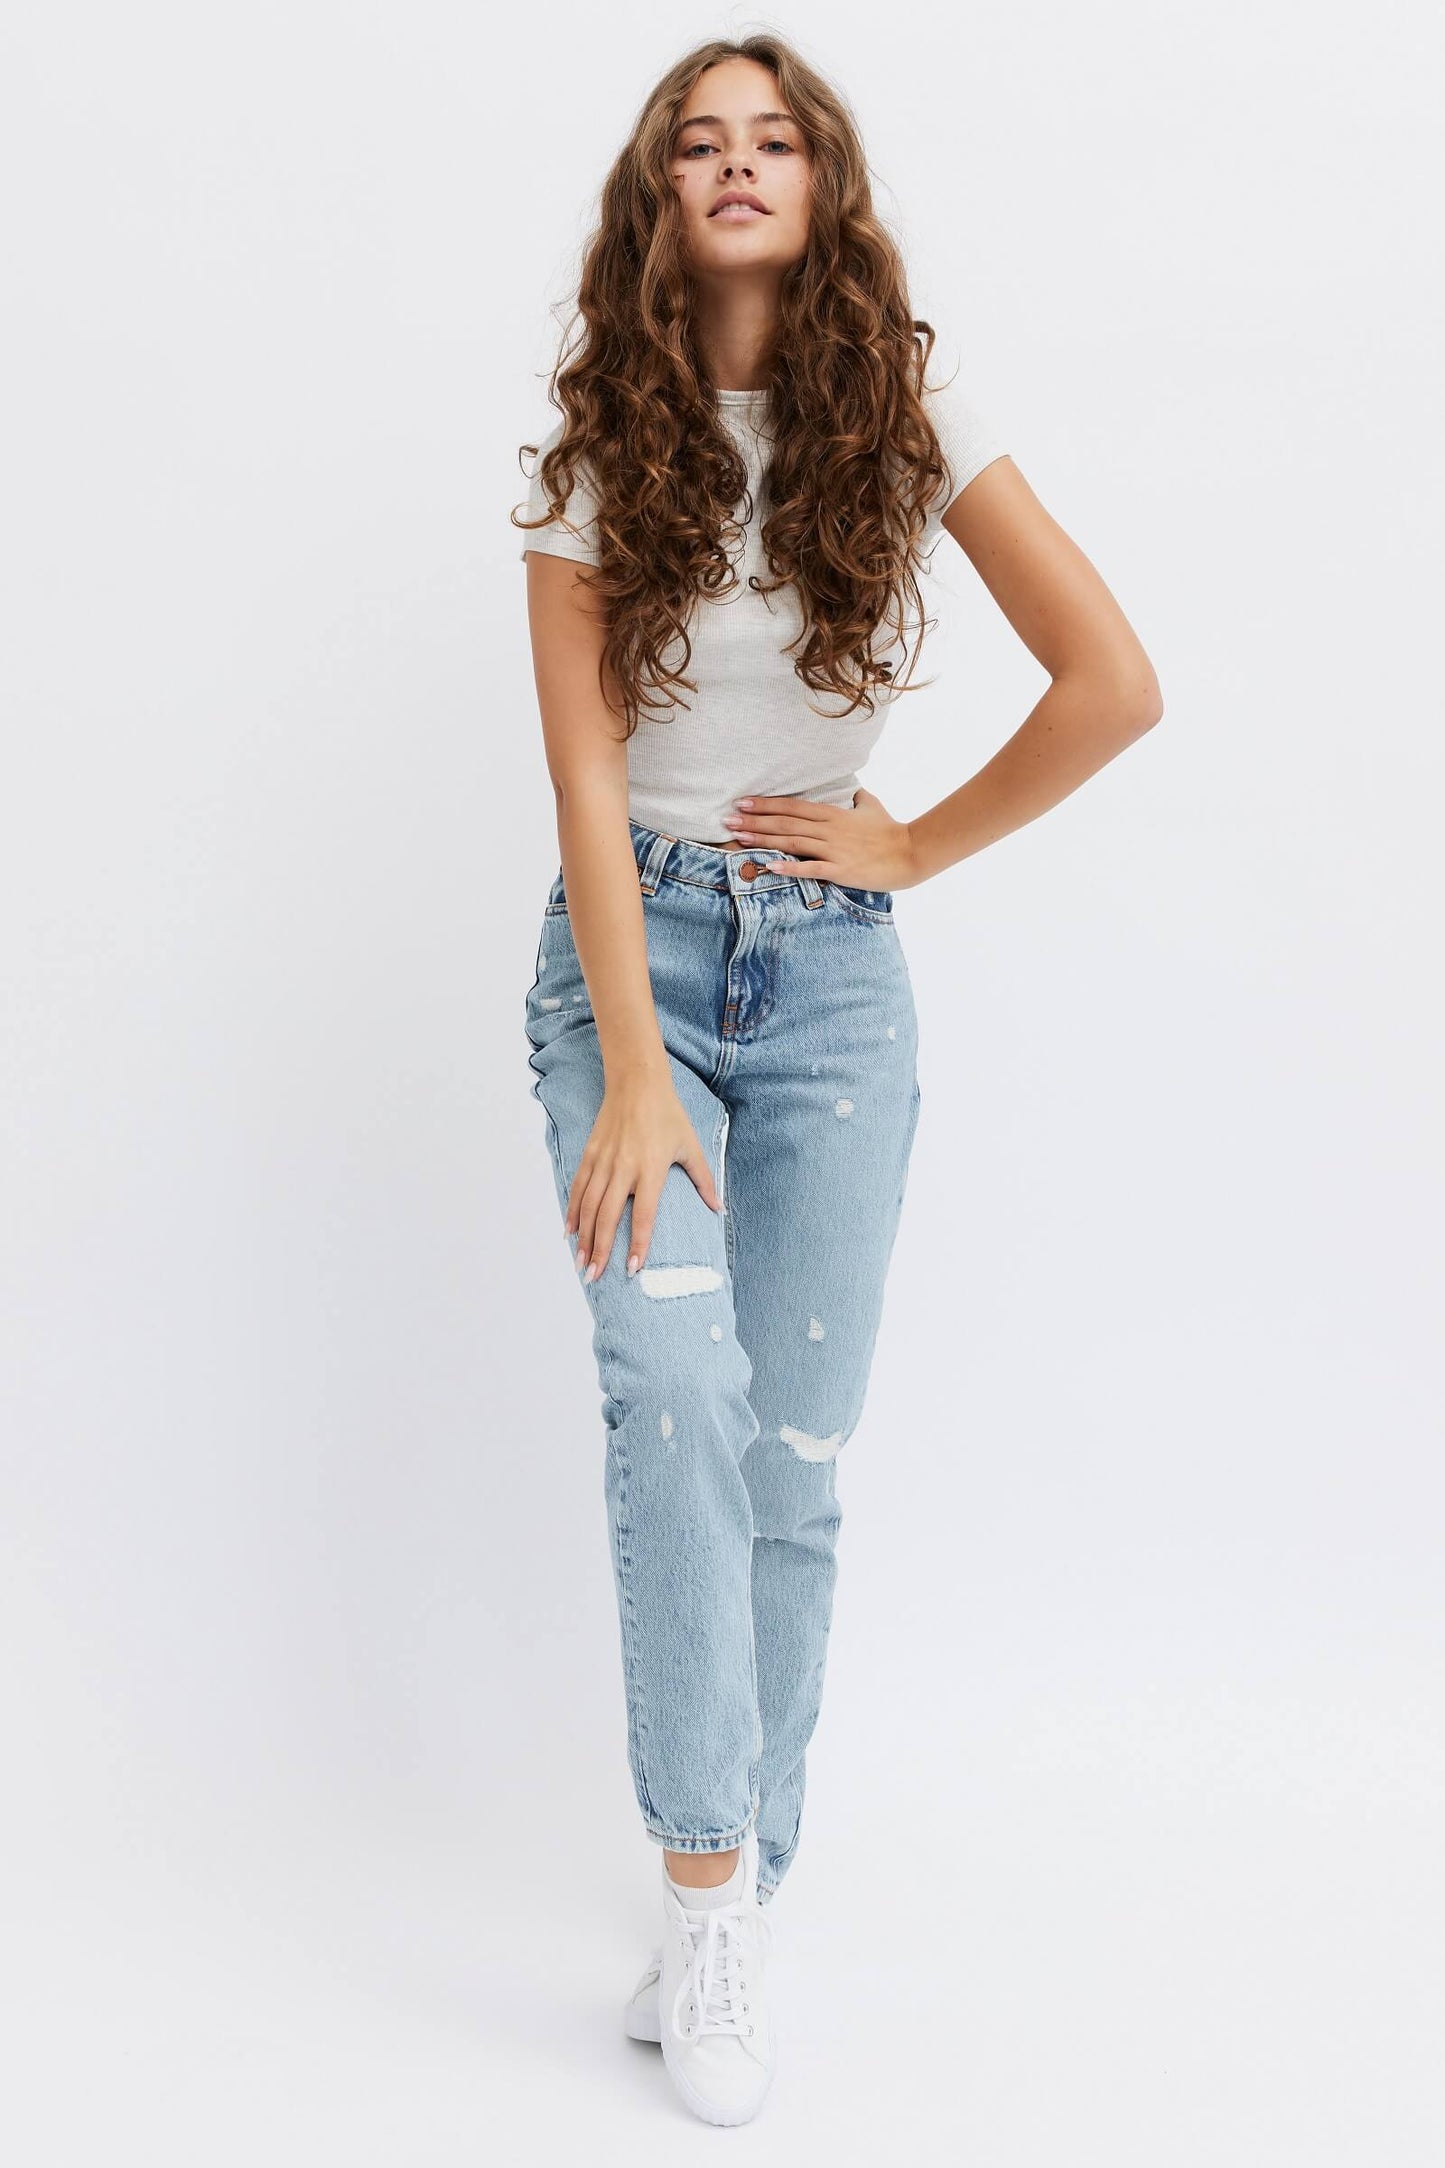 Ripped jeans and stylish denim for women. 